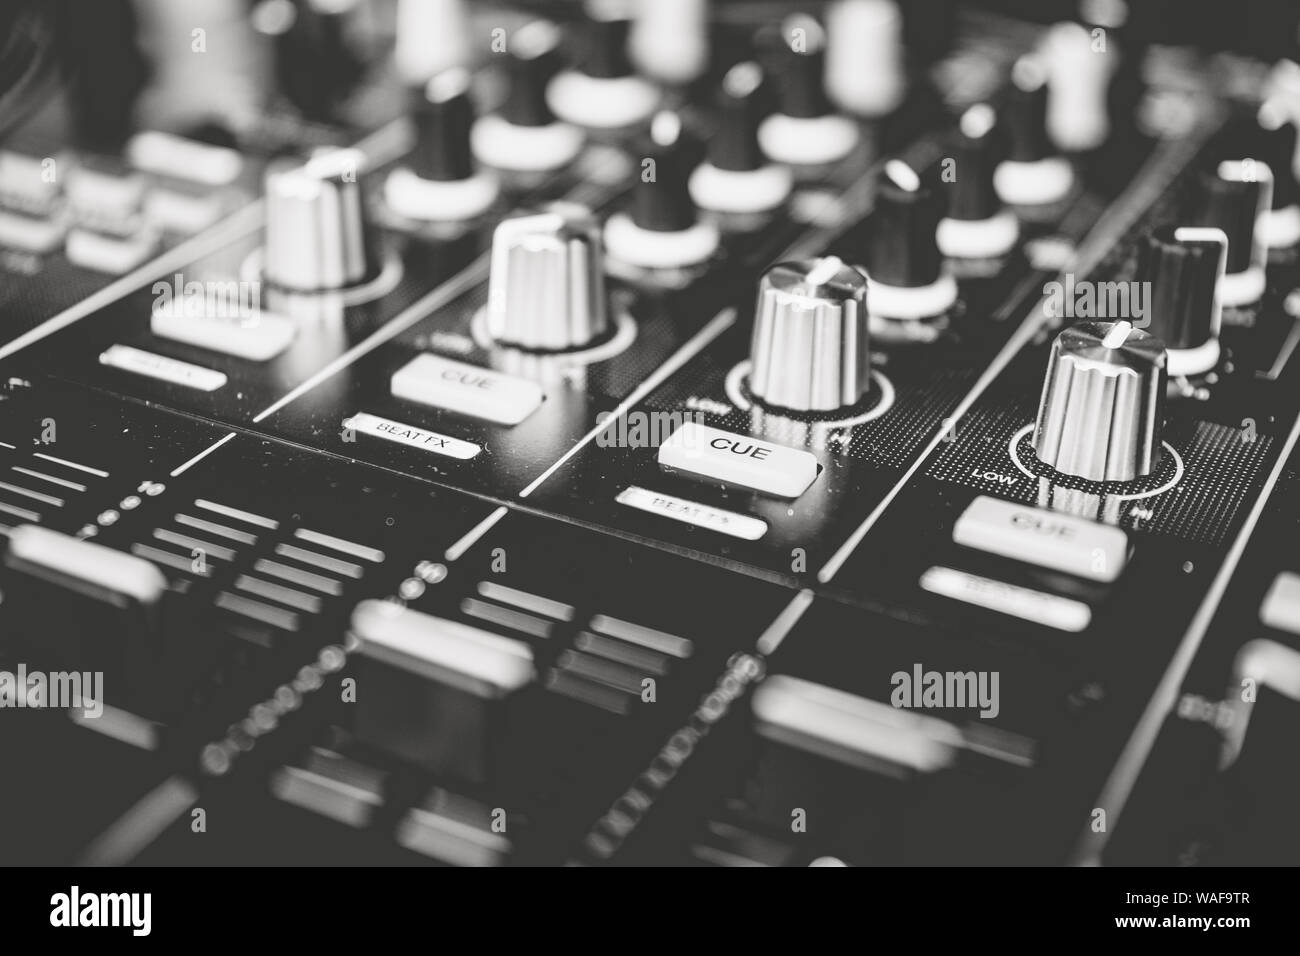 A close up of a DJ's sound mixer desk in black and white. Stock Photo